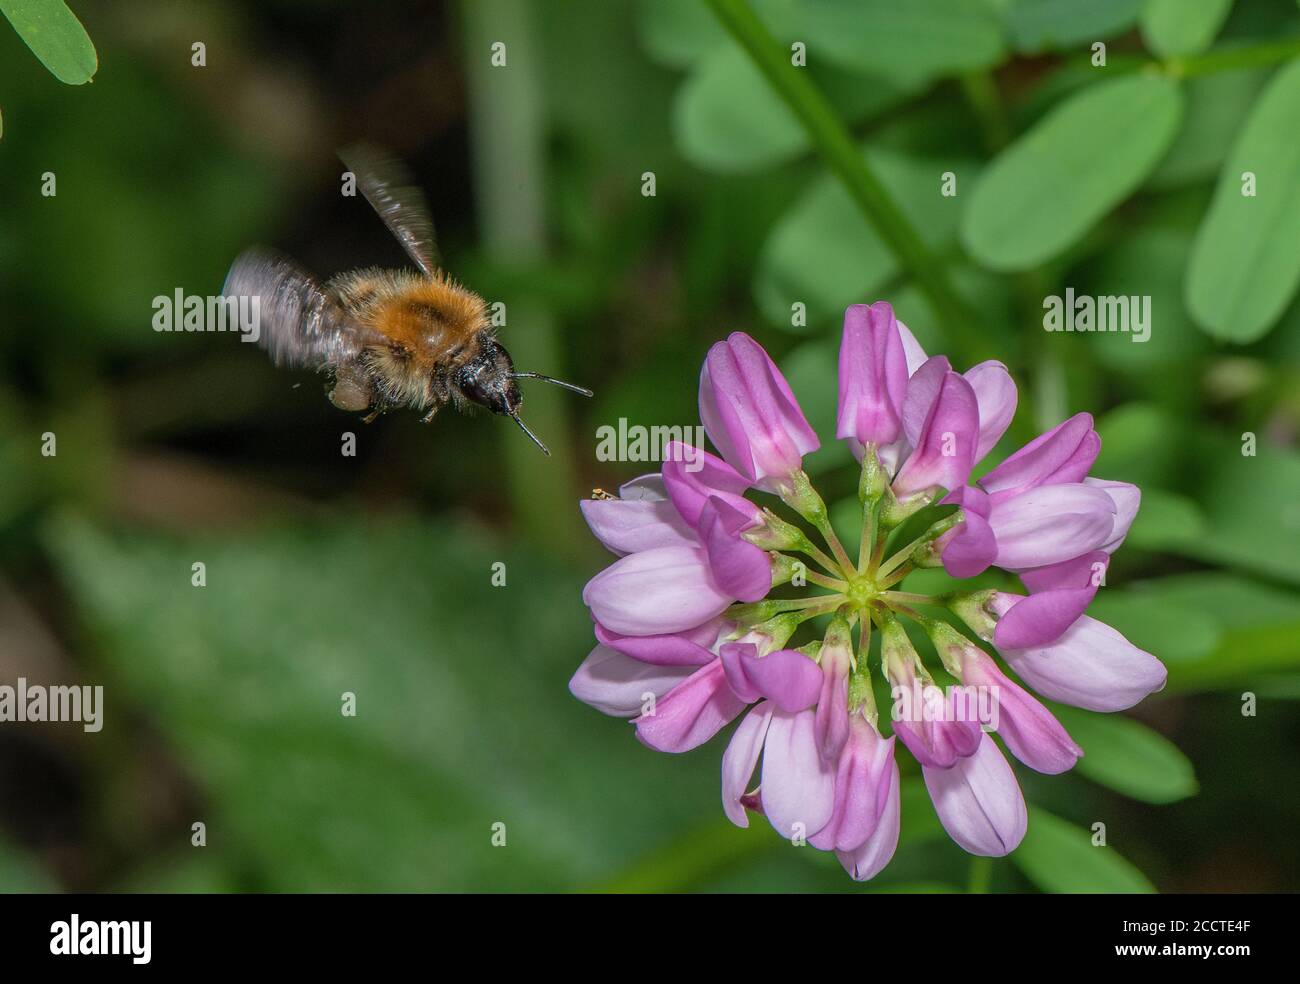 Common Carder Bee, Bombus pascuorum visiting flowers of Crown vetch, Securigera varia, in wildlife garden. Stock Photo